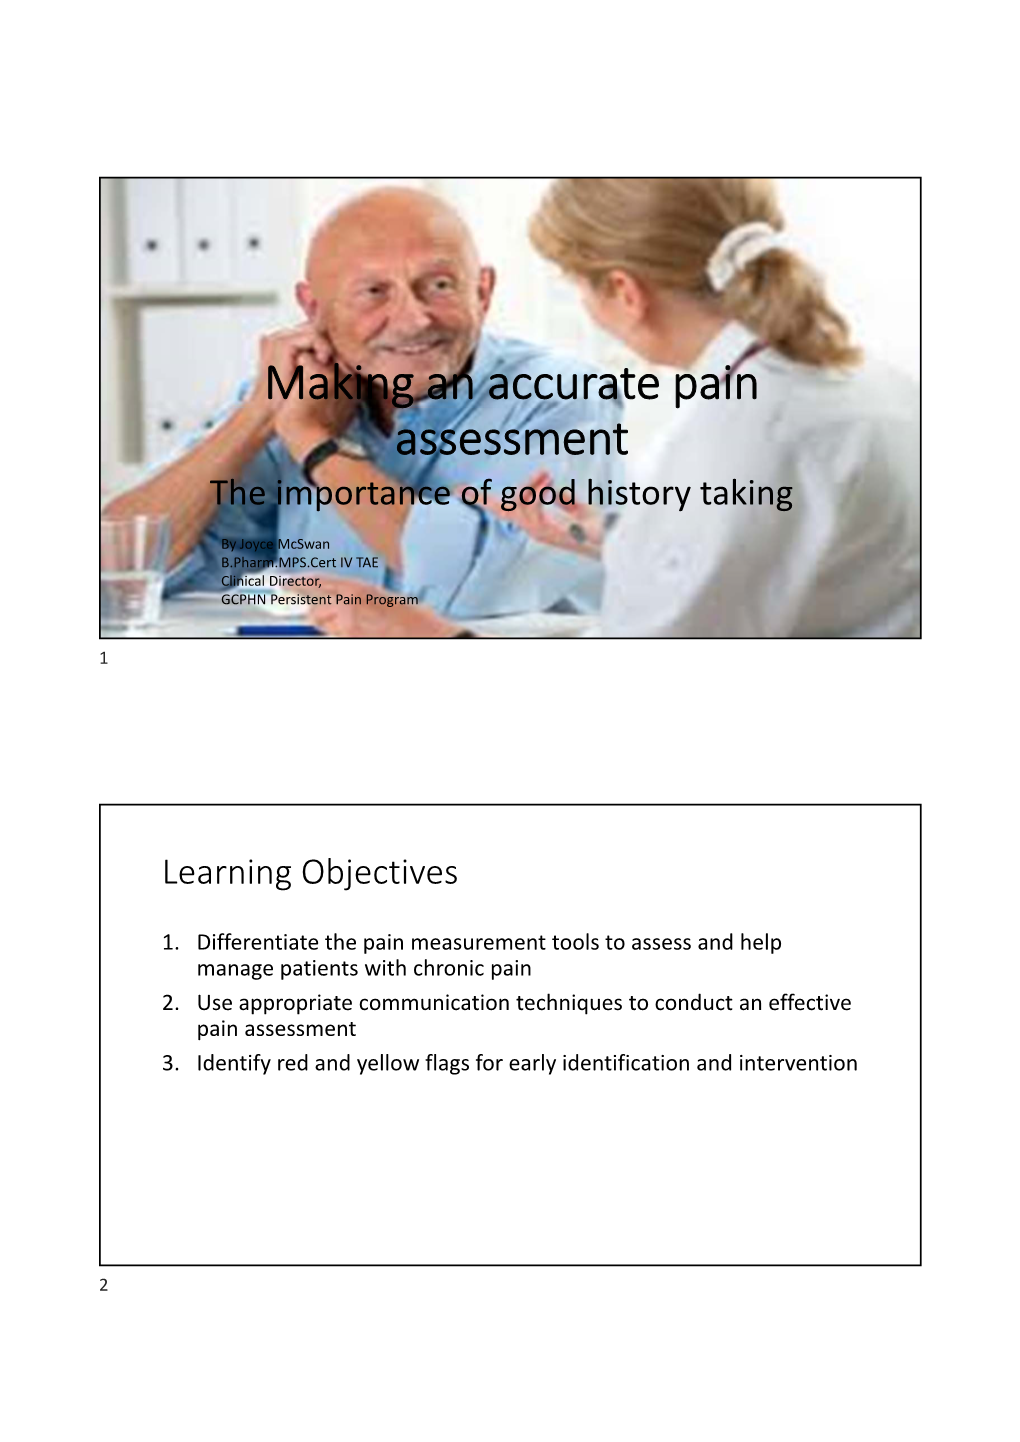 Making an Accurate Pain Assessment the Importance of Good History Taking